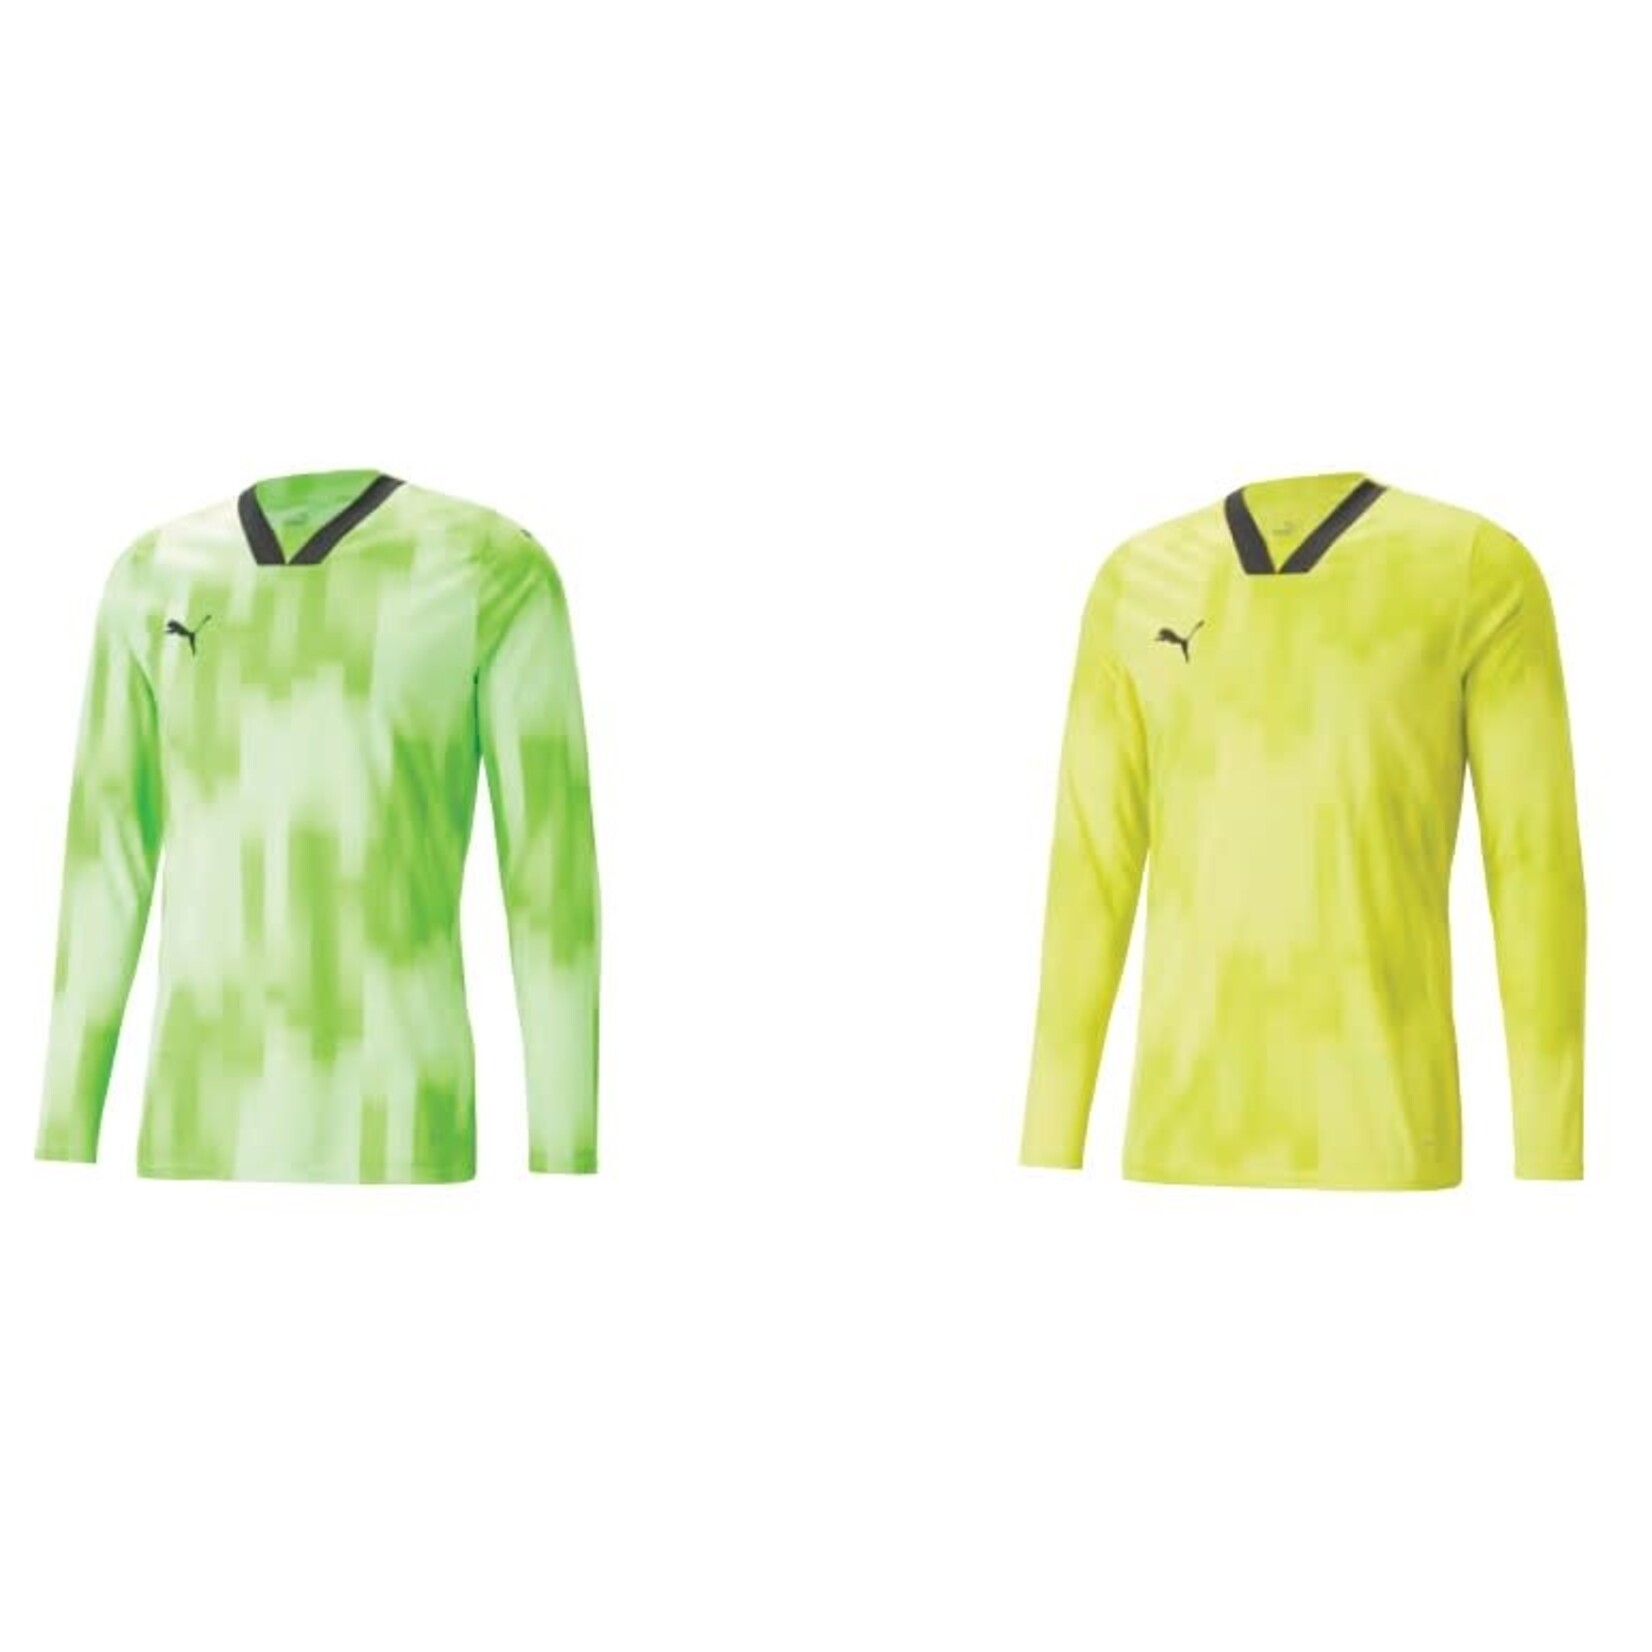 Puma teamTARGET GK Jersey Youth